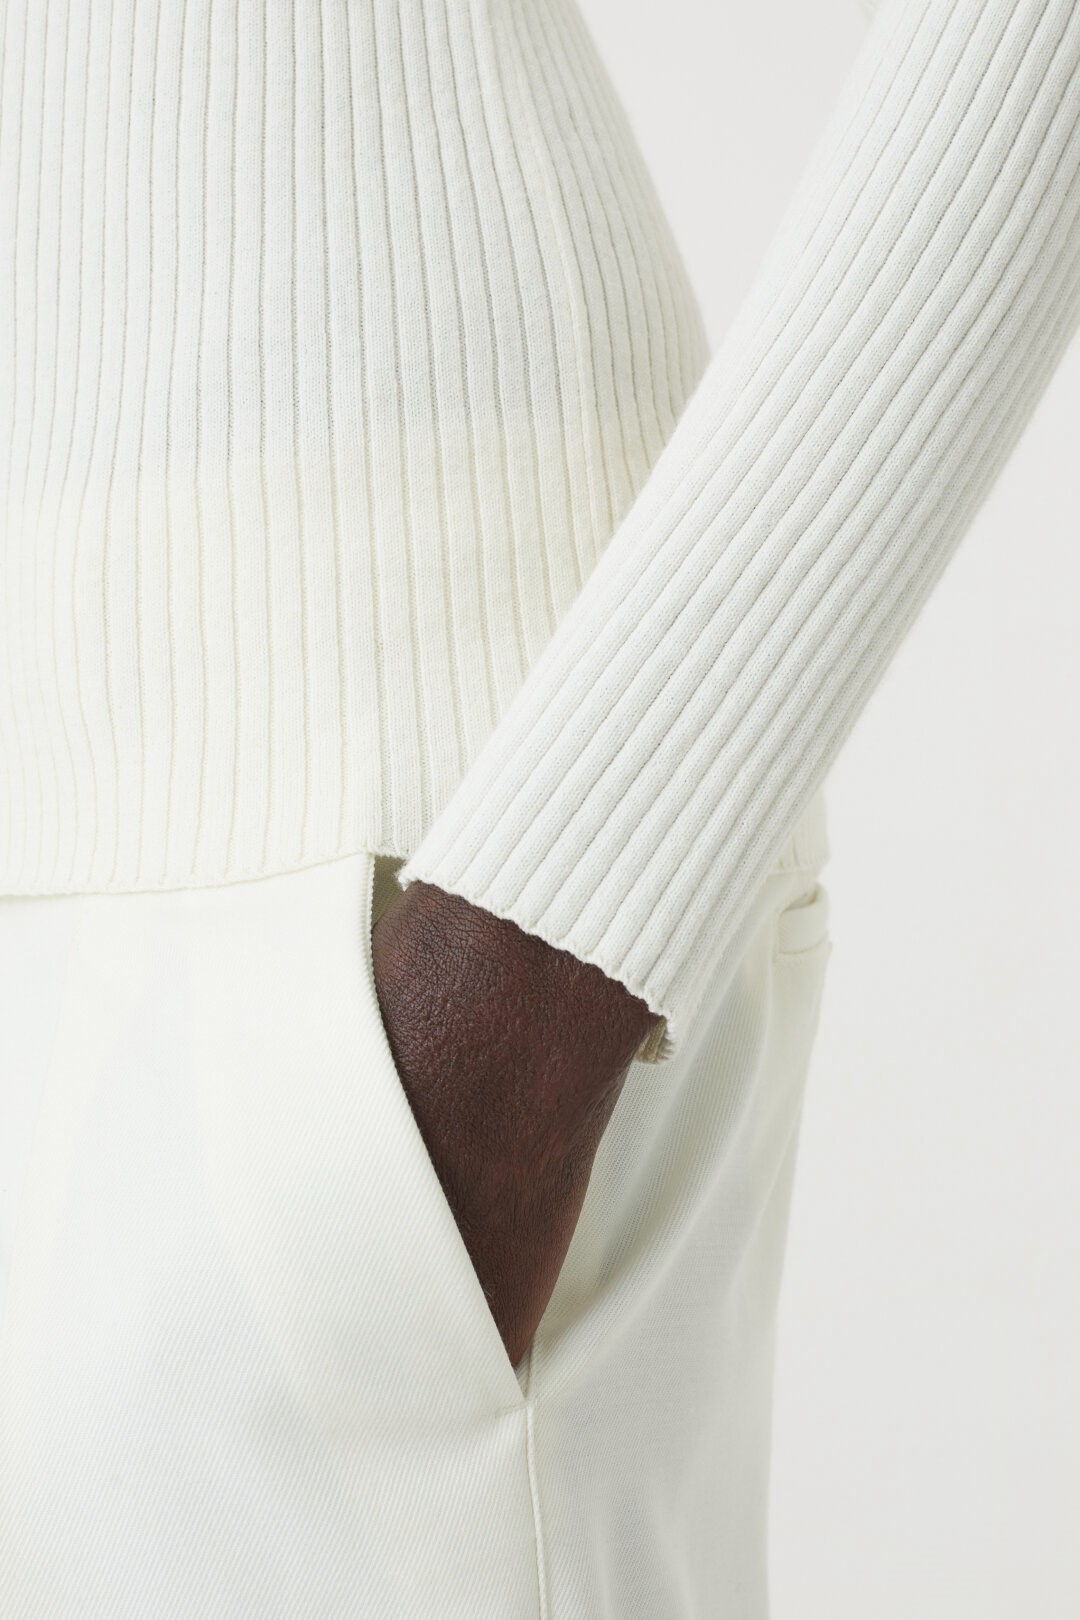 CLOSED Knitted V-Neck Longsleeve in Offwhite